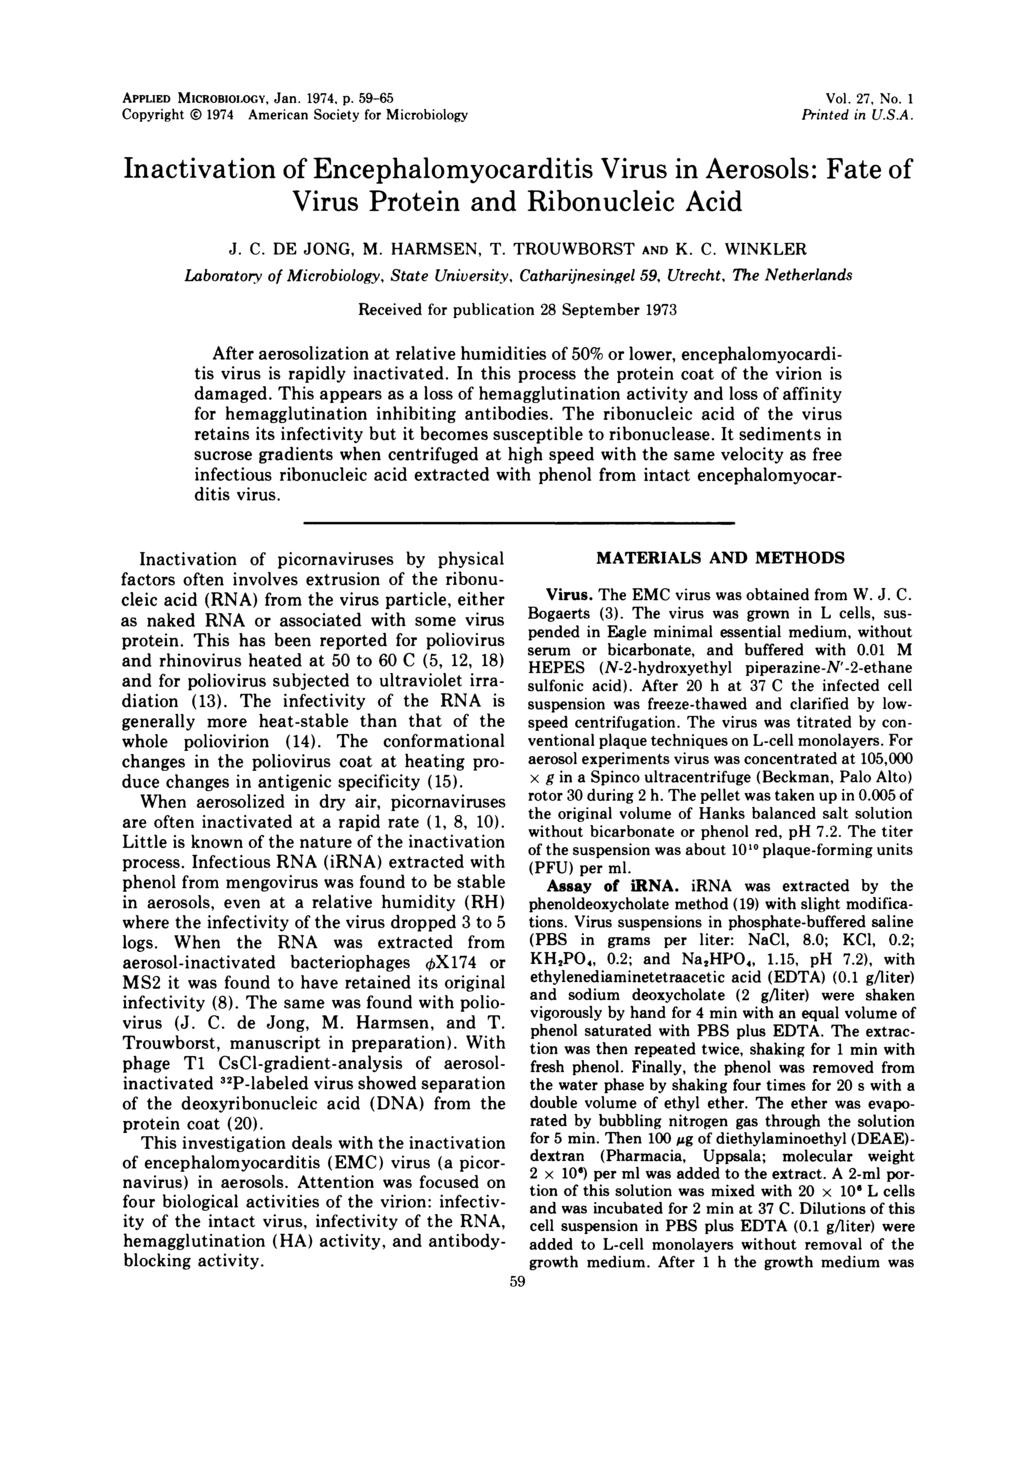 APPLIED MICROBIOLOGY, Jan. 1974, p. 59-65 Copyright 0 1974 American Society for Microbiology Vol. 27, No. 1 Printed in U.S.A. Inactivation of Encephalomyocarditis Virus in Aerosols: Fate of Virus Protein and Ribonucleic Acid J.